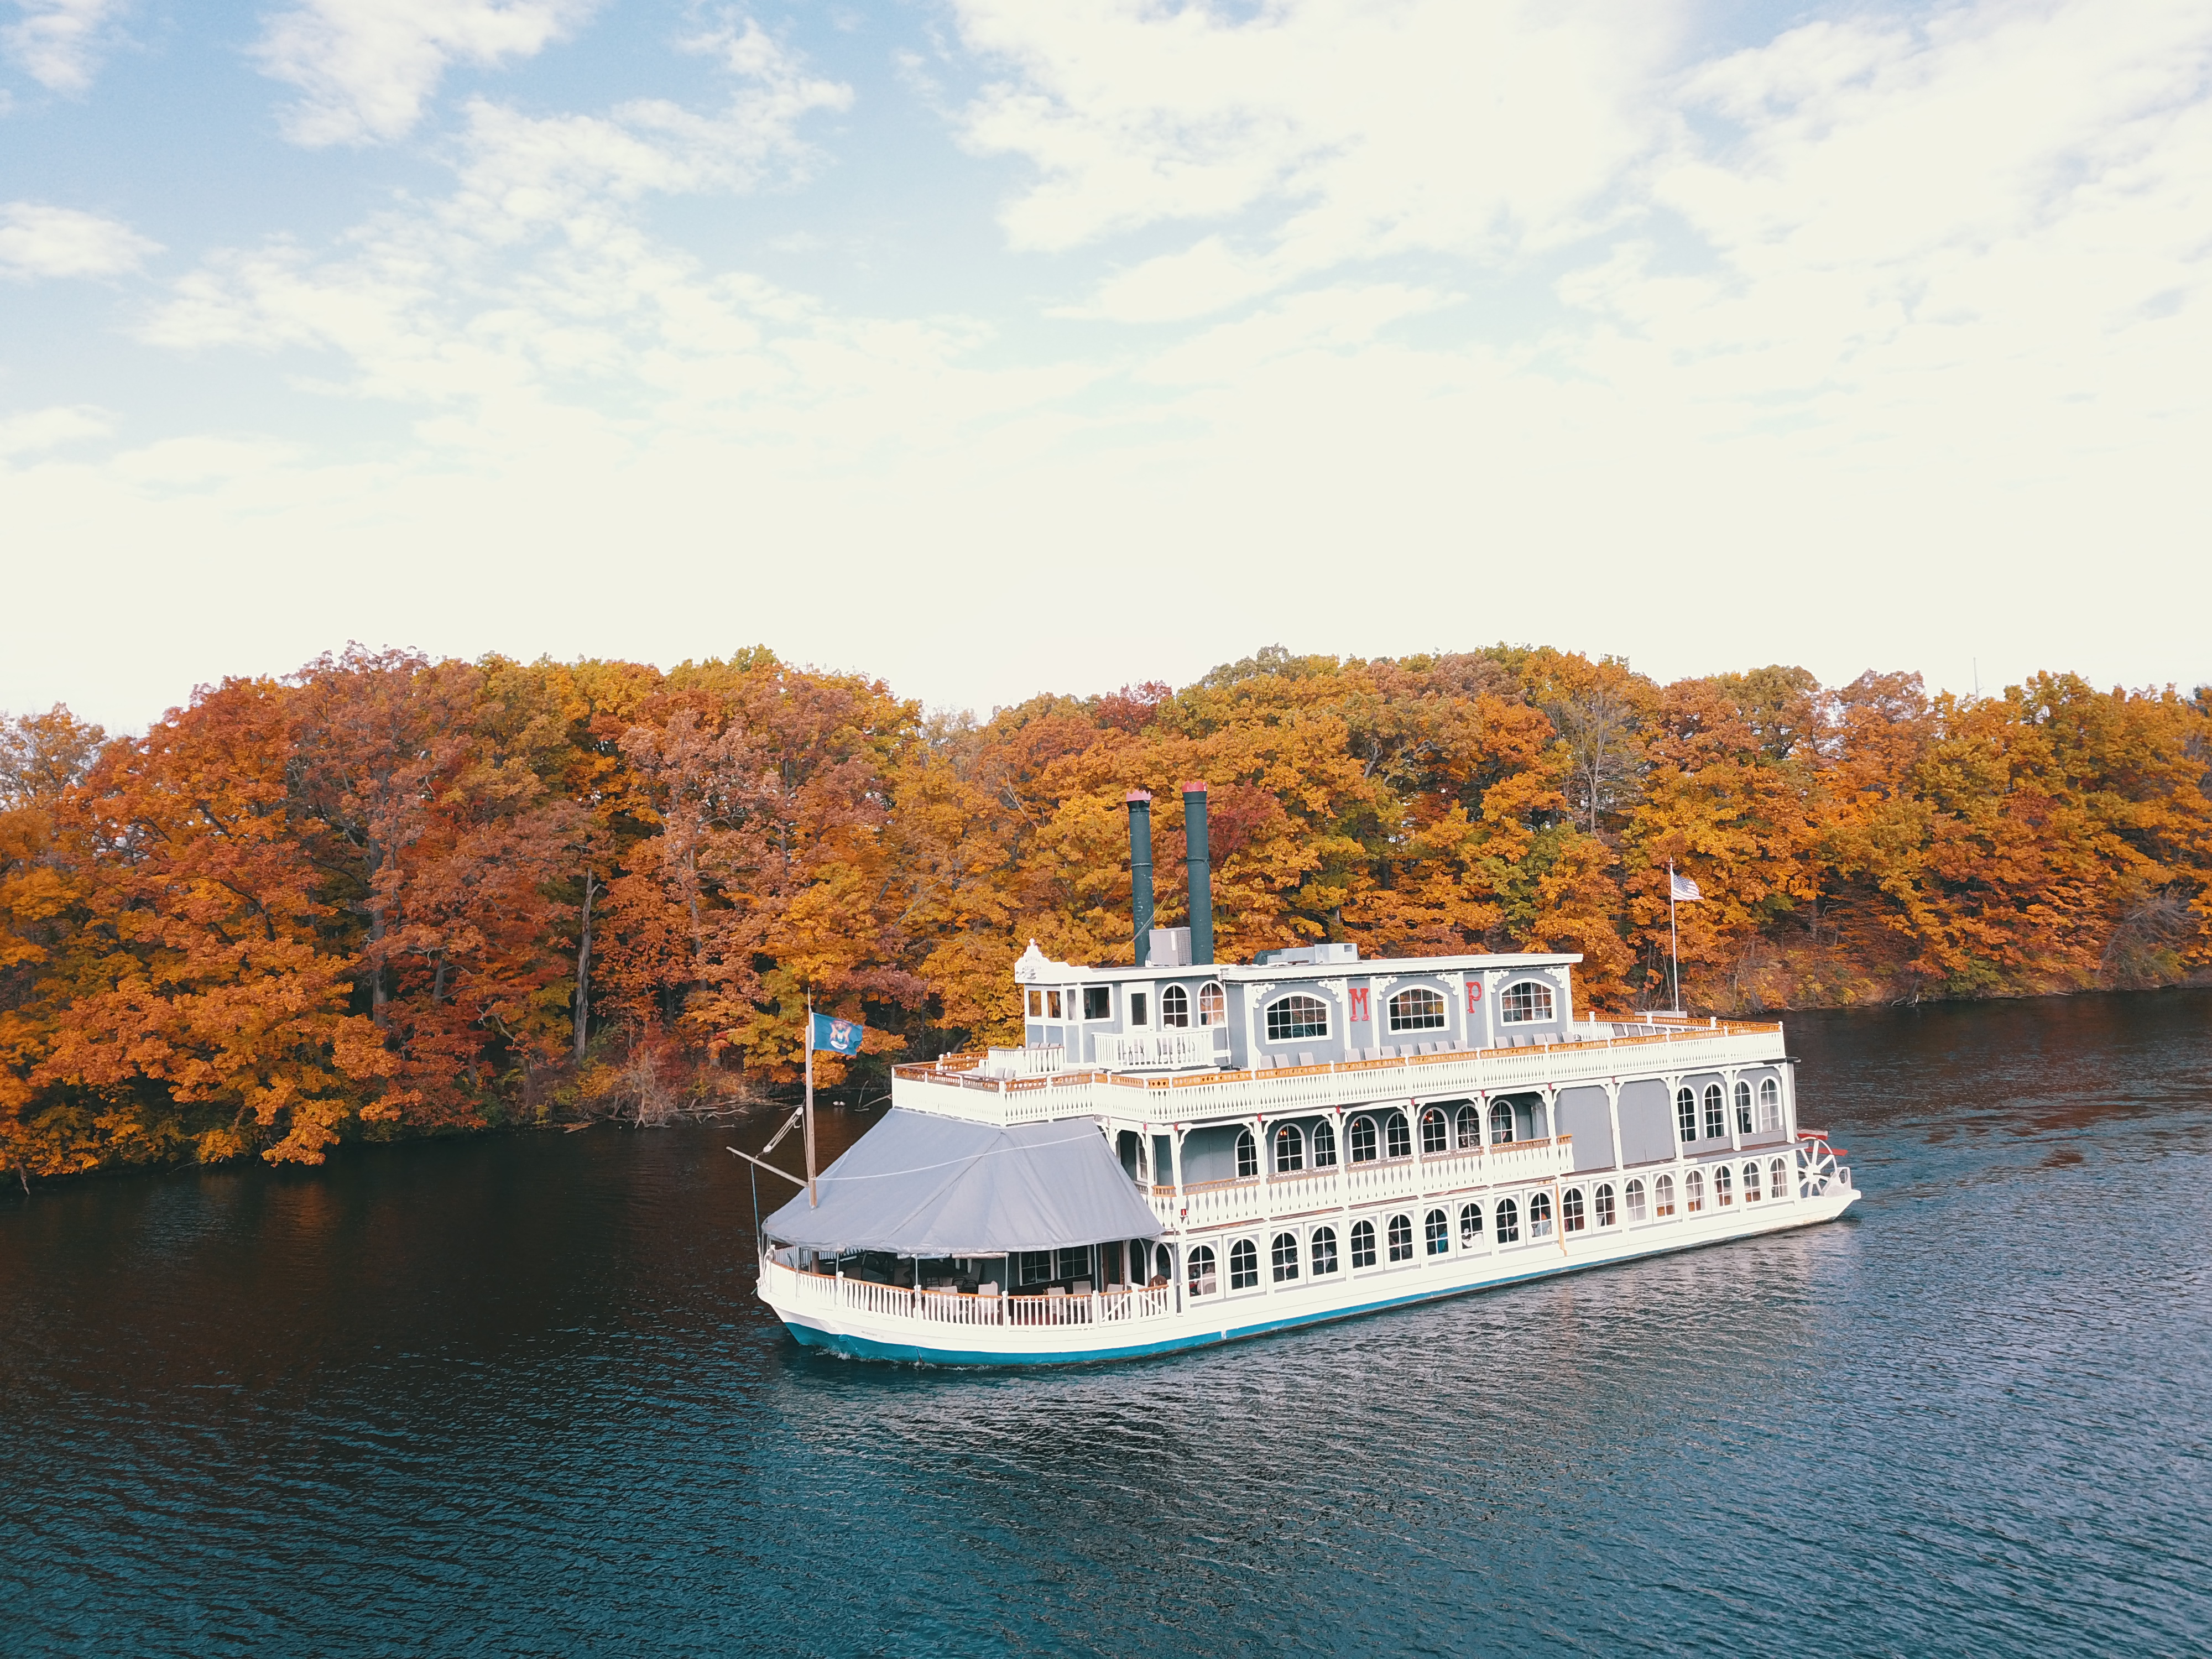 A river boat on the water, serving as a wedding venue, the Michigan Princess Riverboat